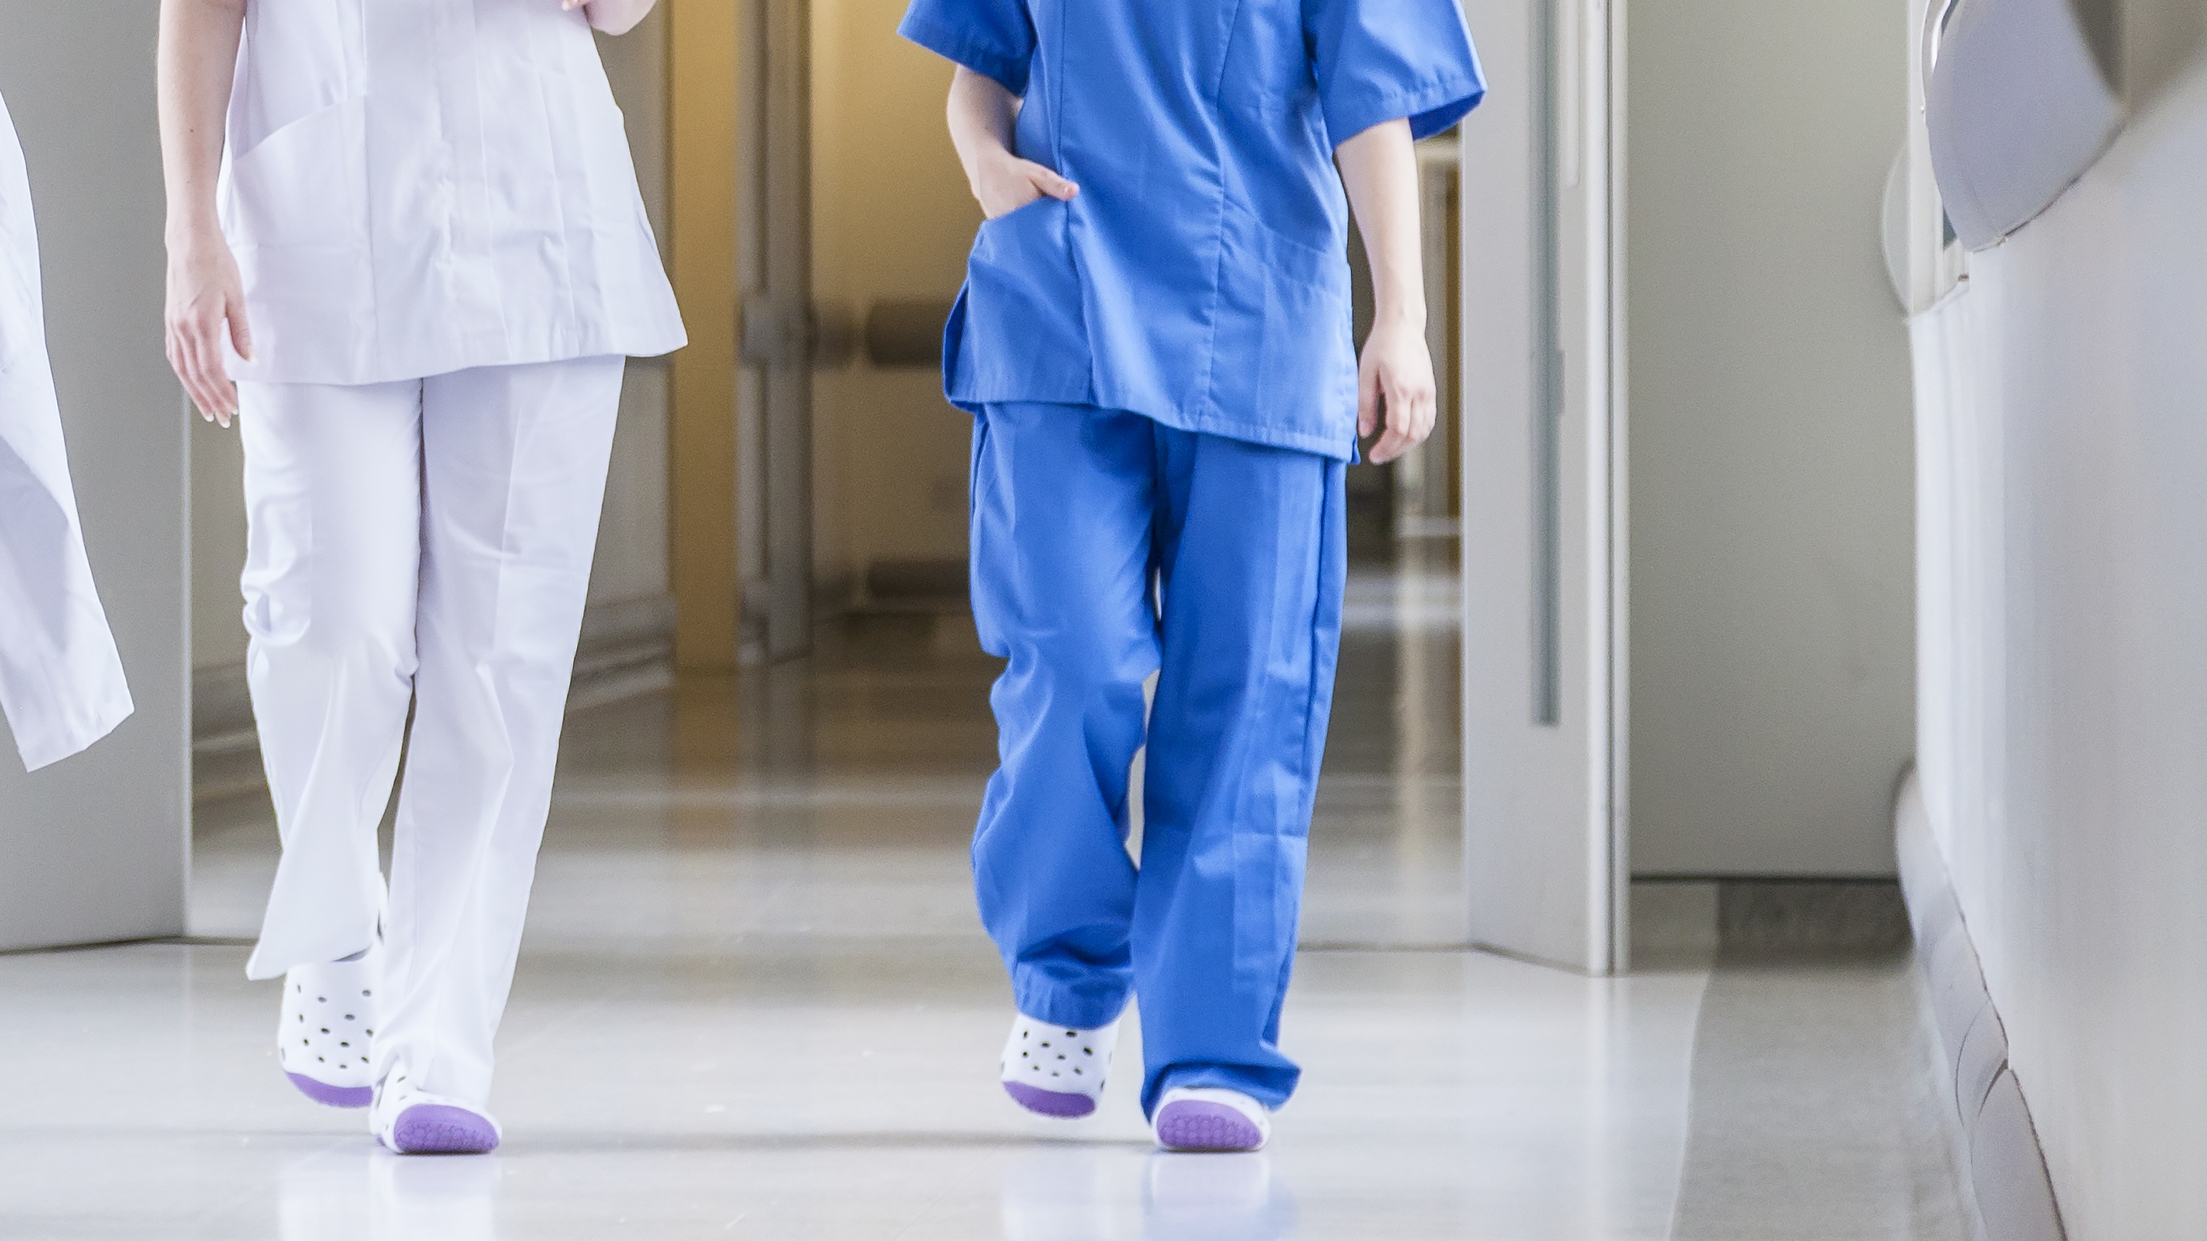 Upcoming webinar: The Effects of an Electronic Hourly Rounding Tool on Nurses’ Steps